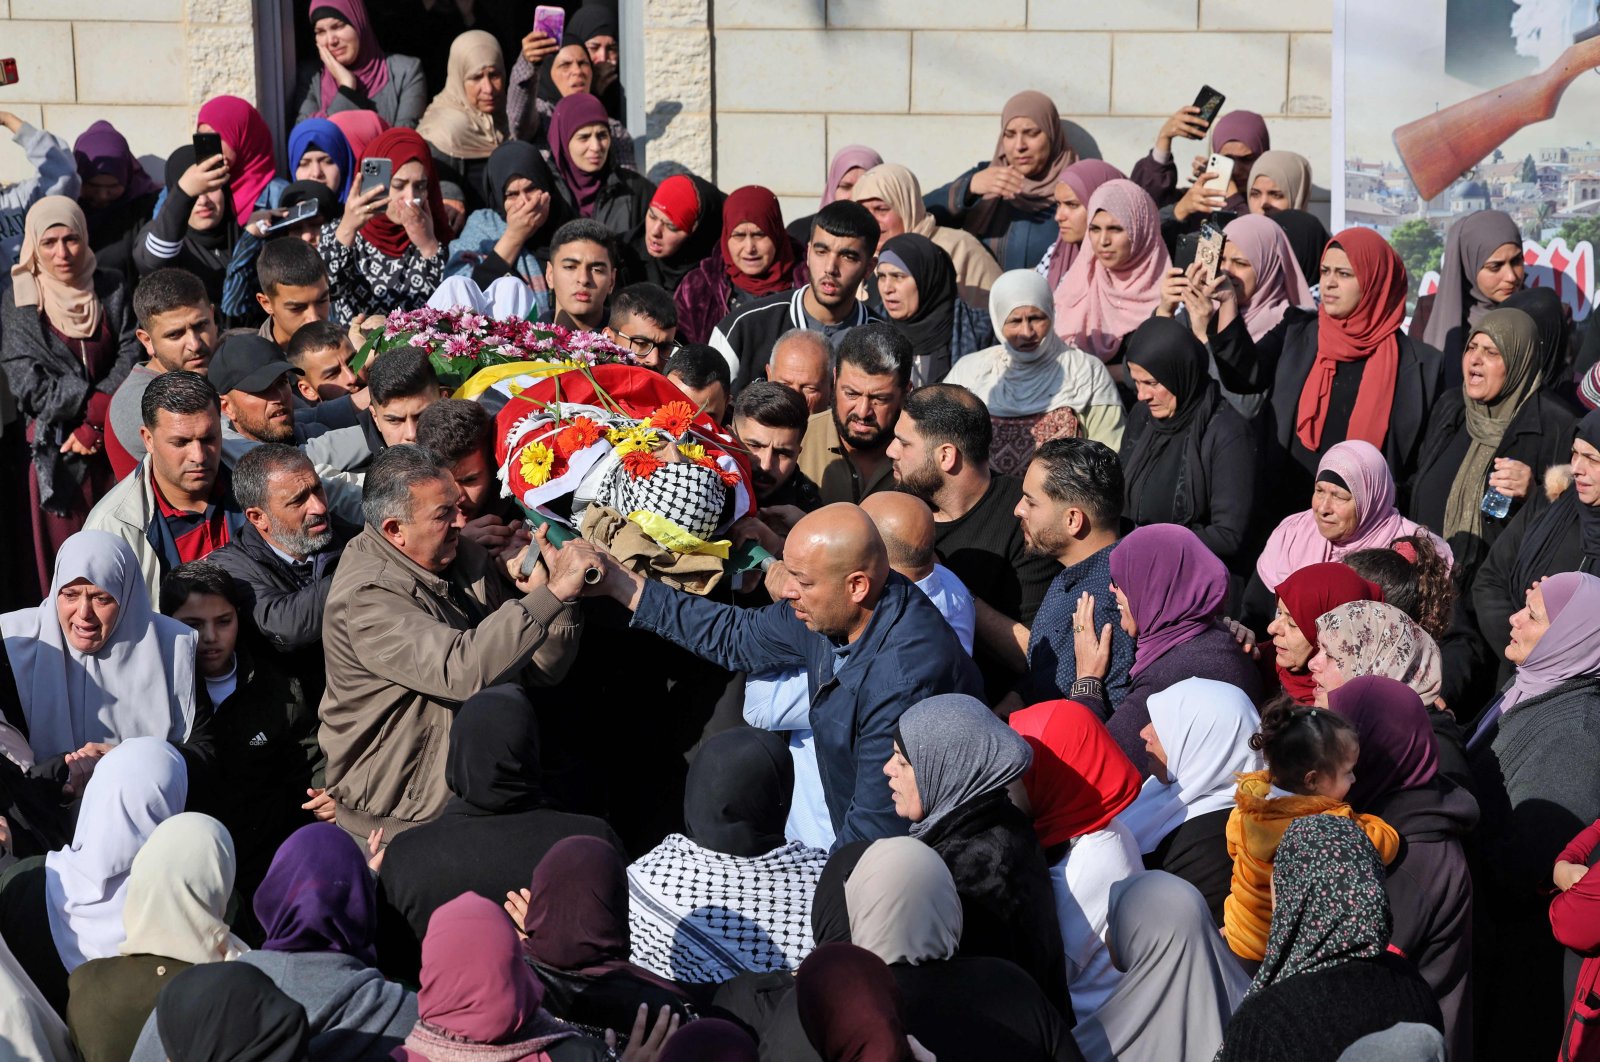 Palestinian mourners attend a funeral procession in the village of Silwad, in the Israeli-occupied West Bank, Palestine, Dec. 8, 2022. (AFP Photo)